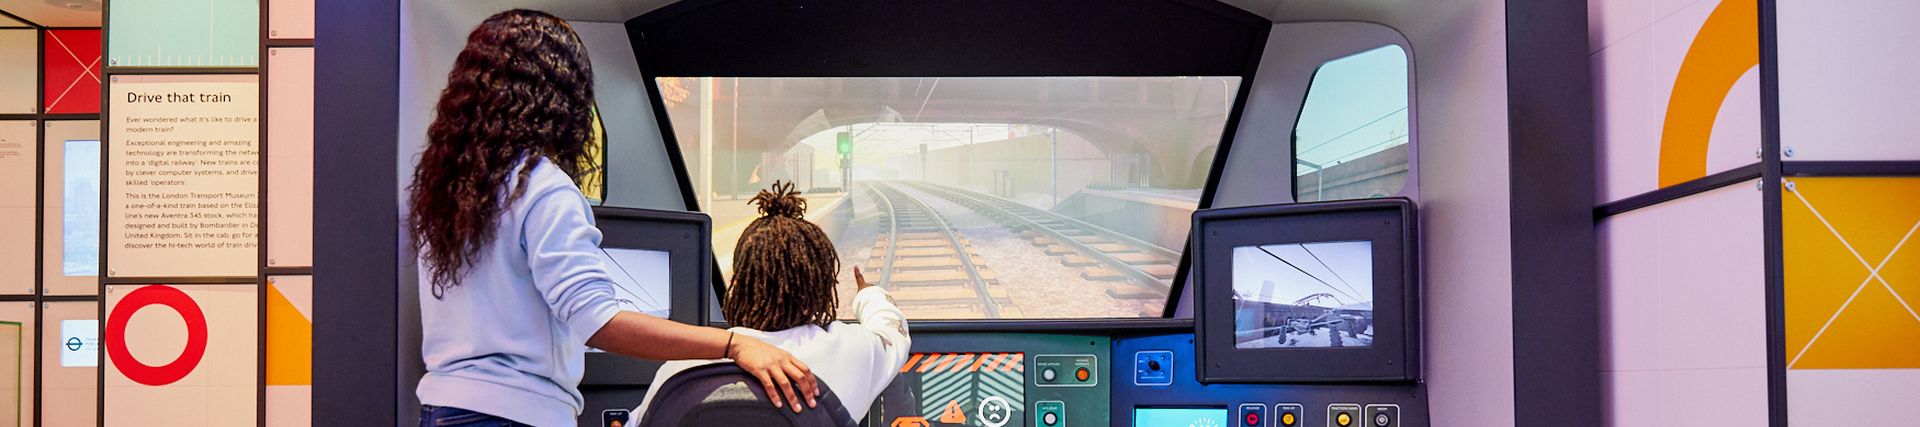 A young black girl sits in front of a train simulator with a young black woman standing next to her